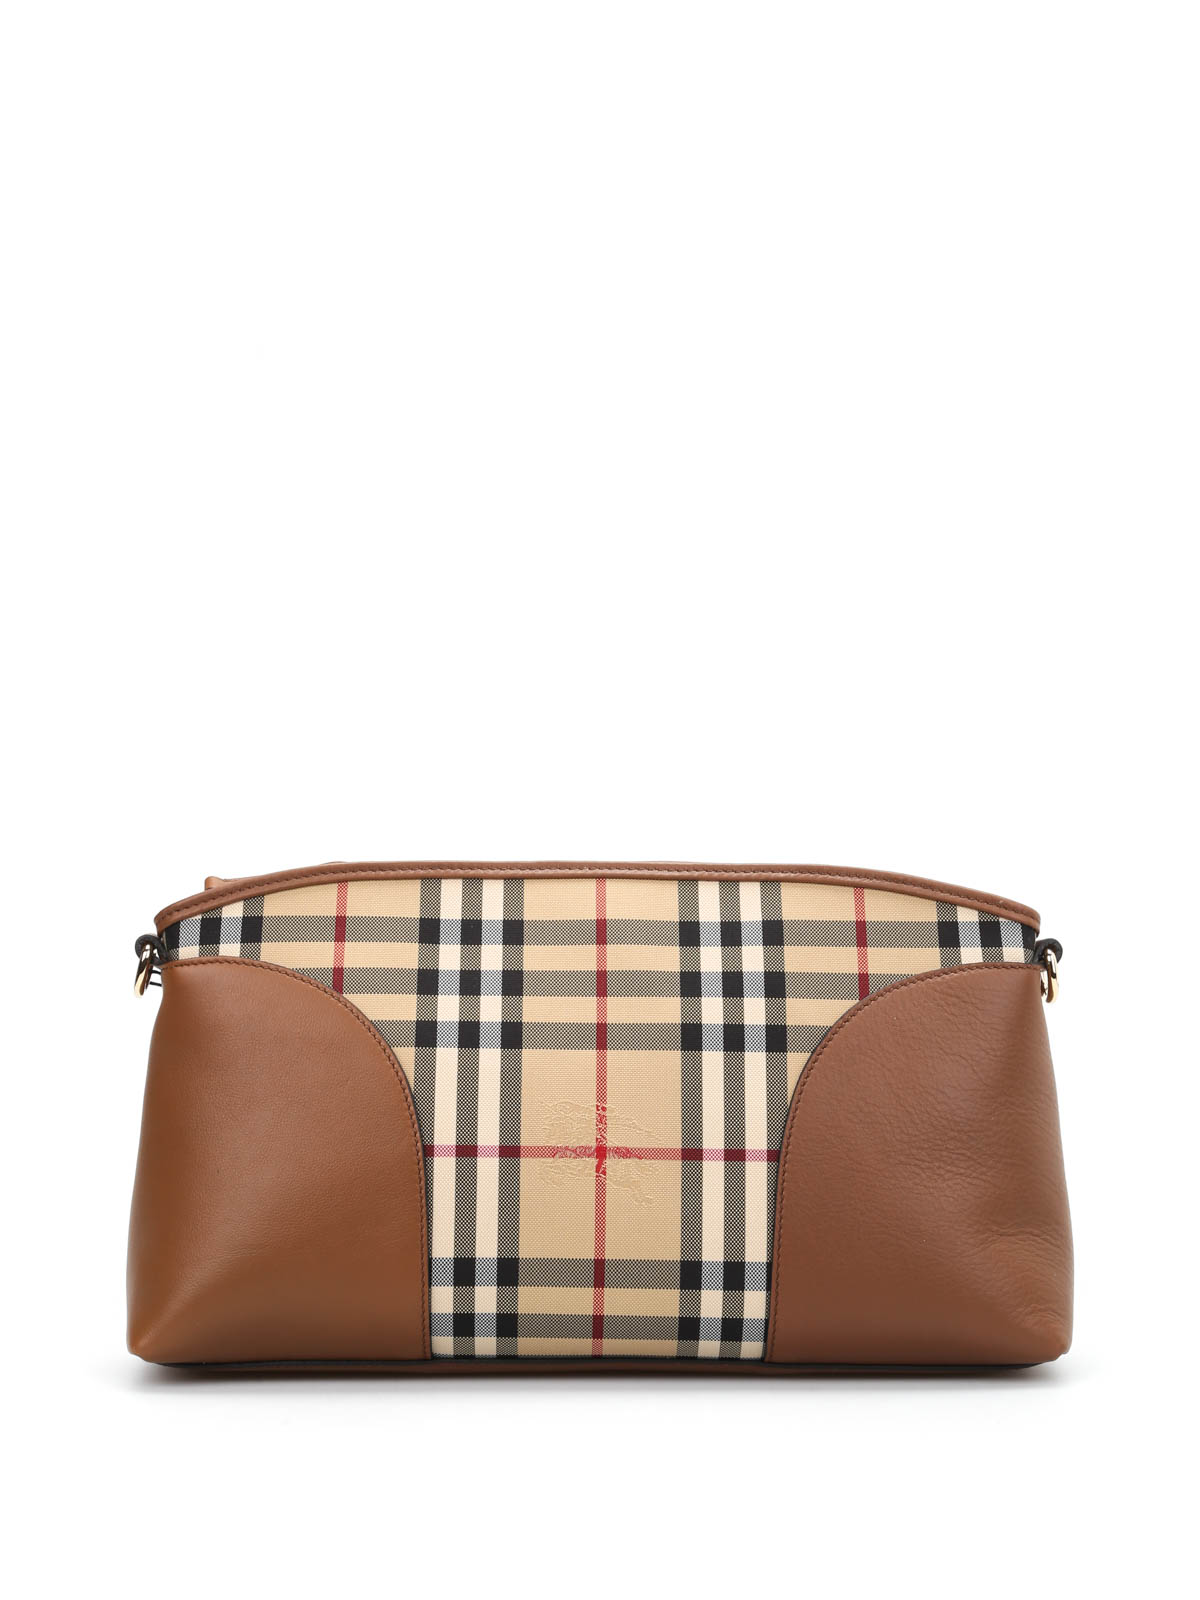 Burberry - Horseferry check Chichester 